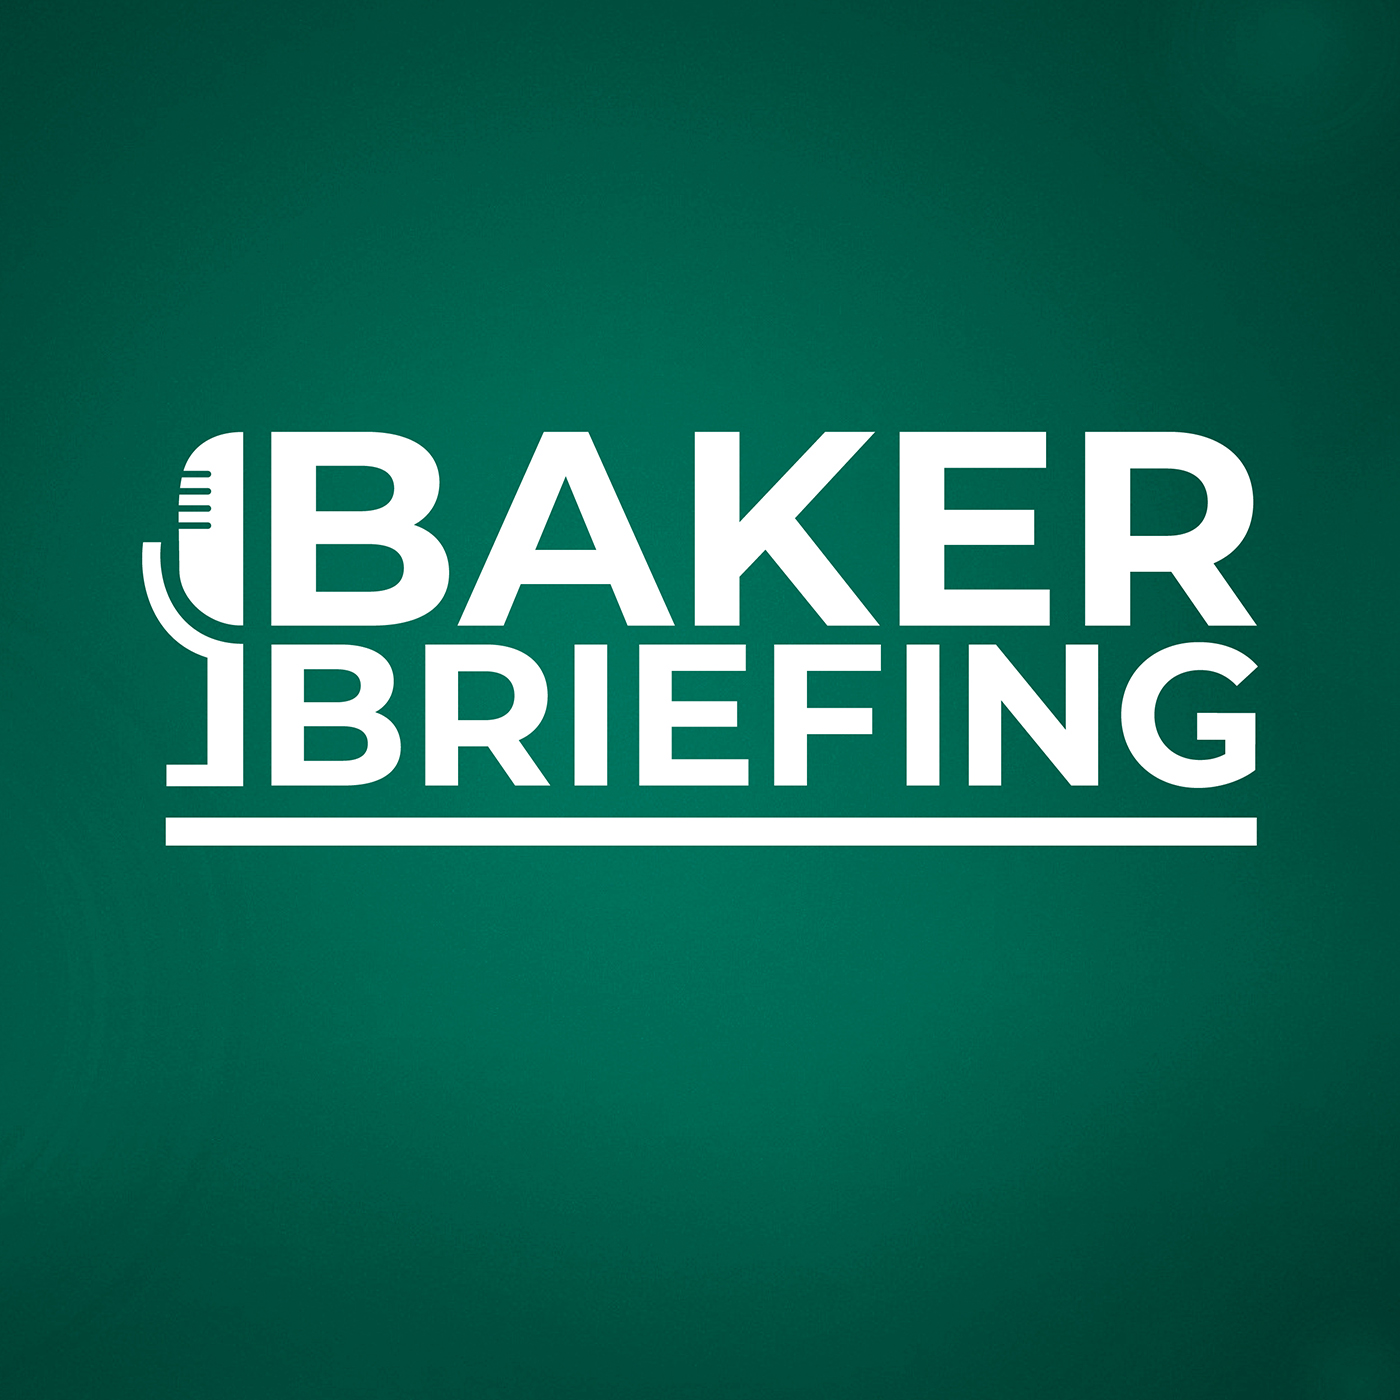 Logo for the Baker Briefing Podcast (Square)